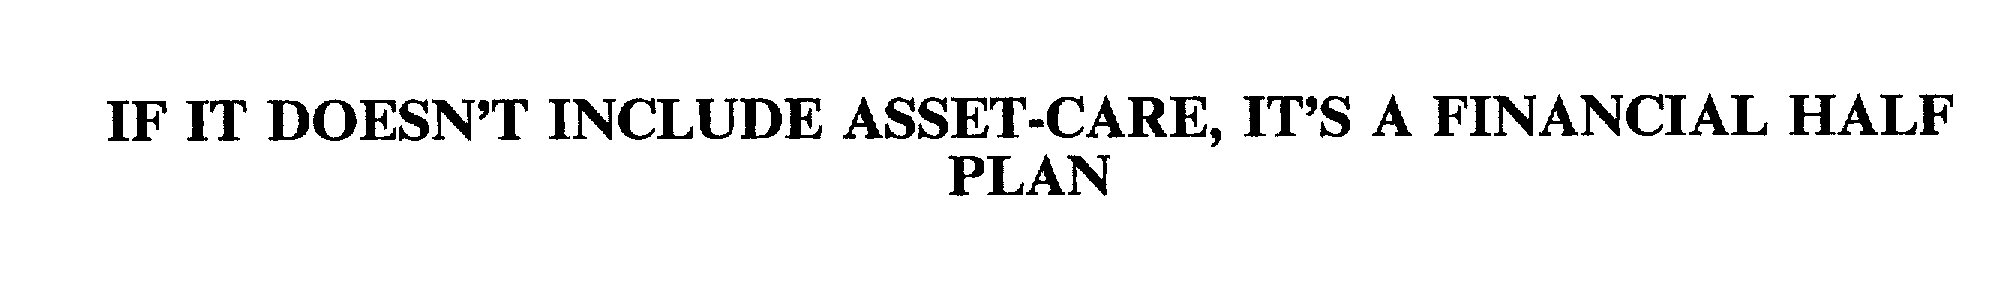  IF IT DOESN'T INCLUDE ASSET-CARE, IT'S A FINANCIAL HALF PLAN